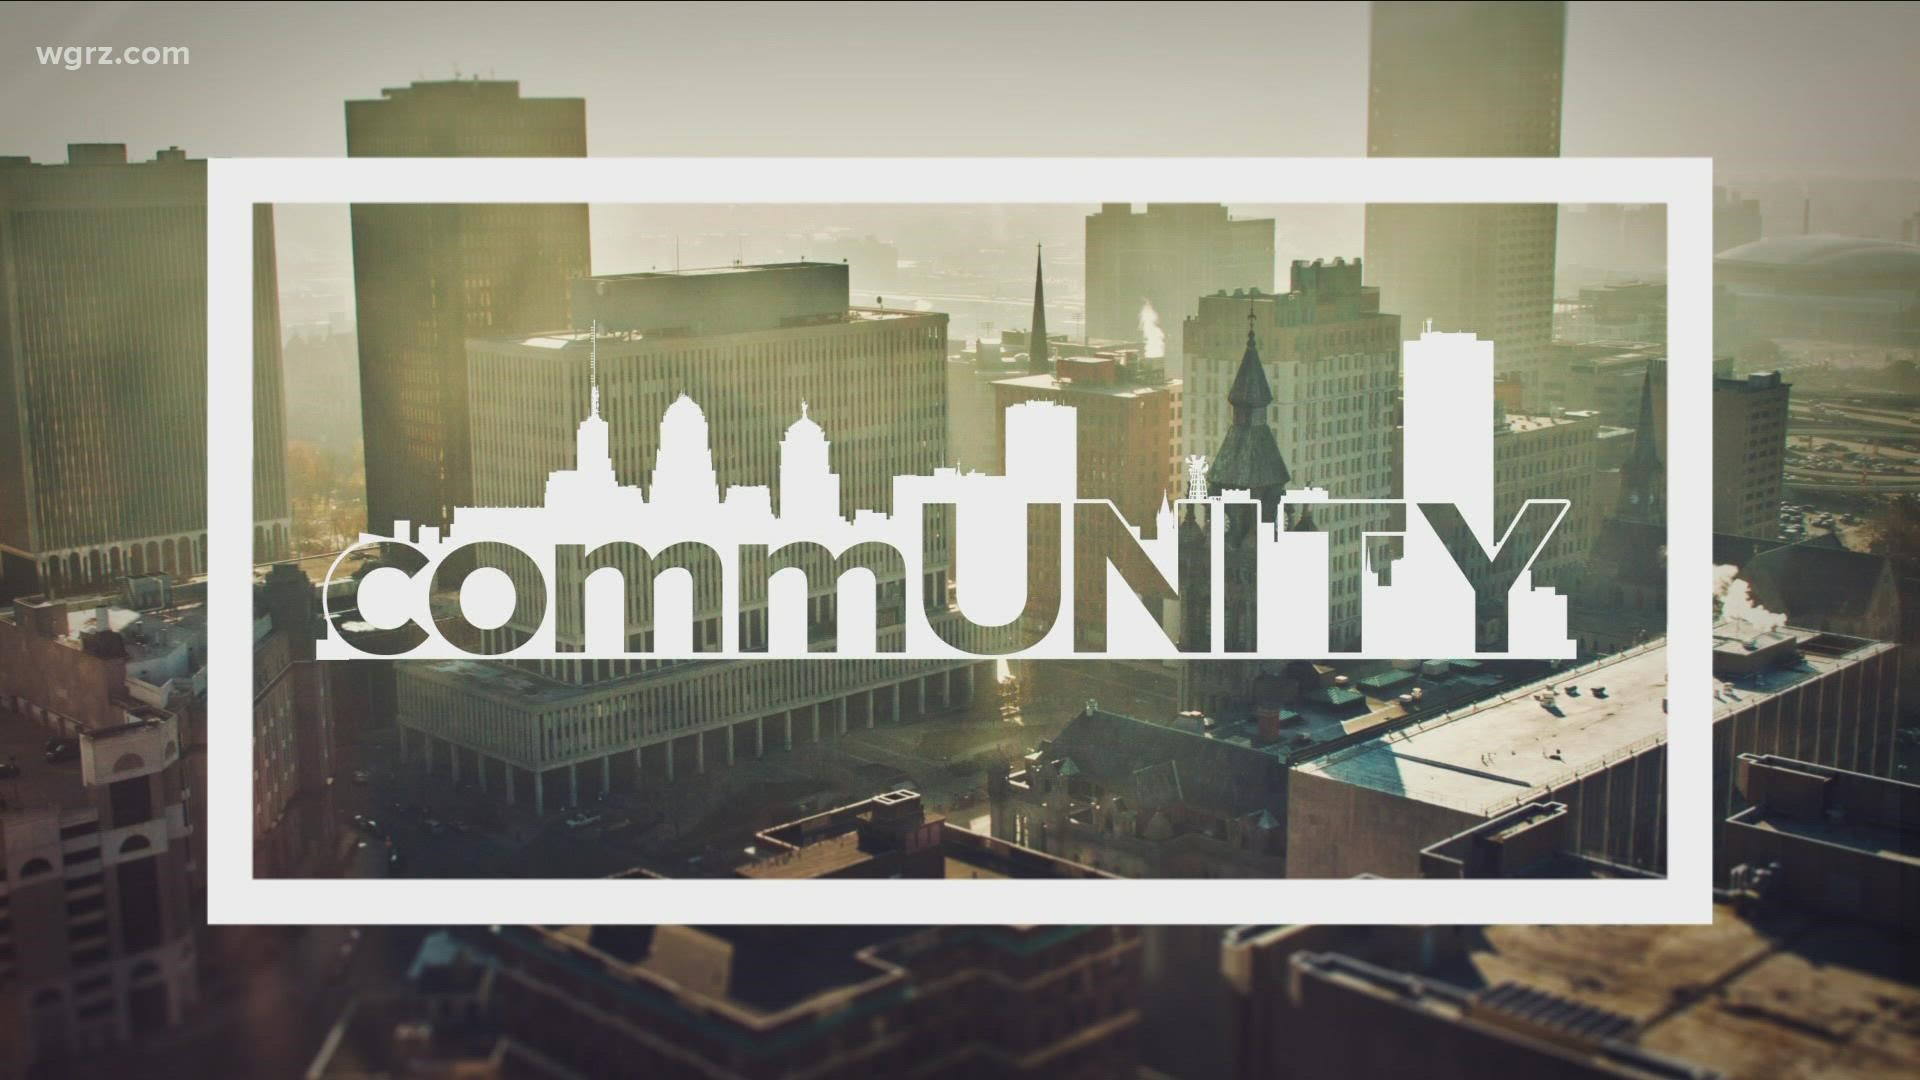 Take a look back at some of the best stories we covered in 2021 on commUNITY.